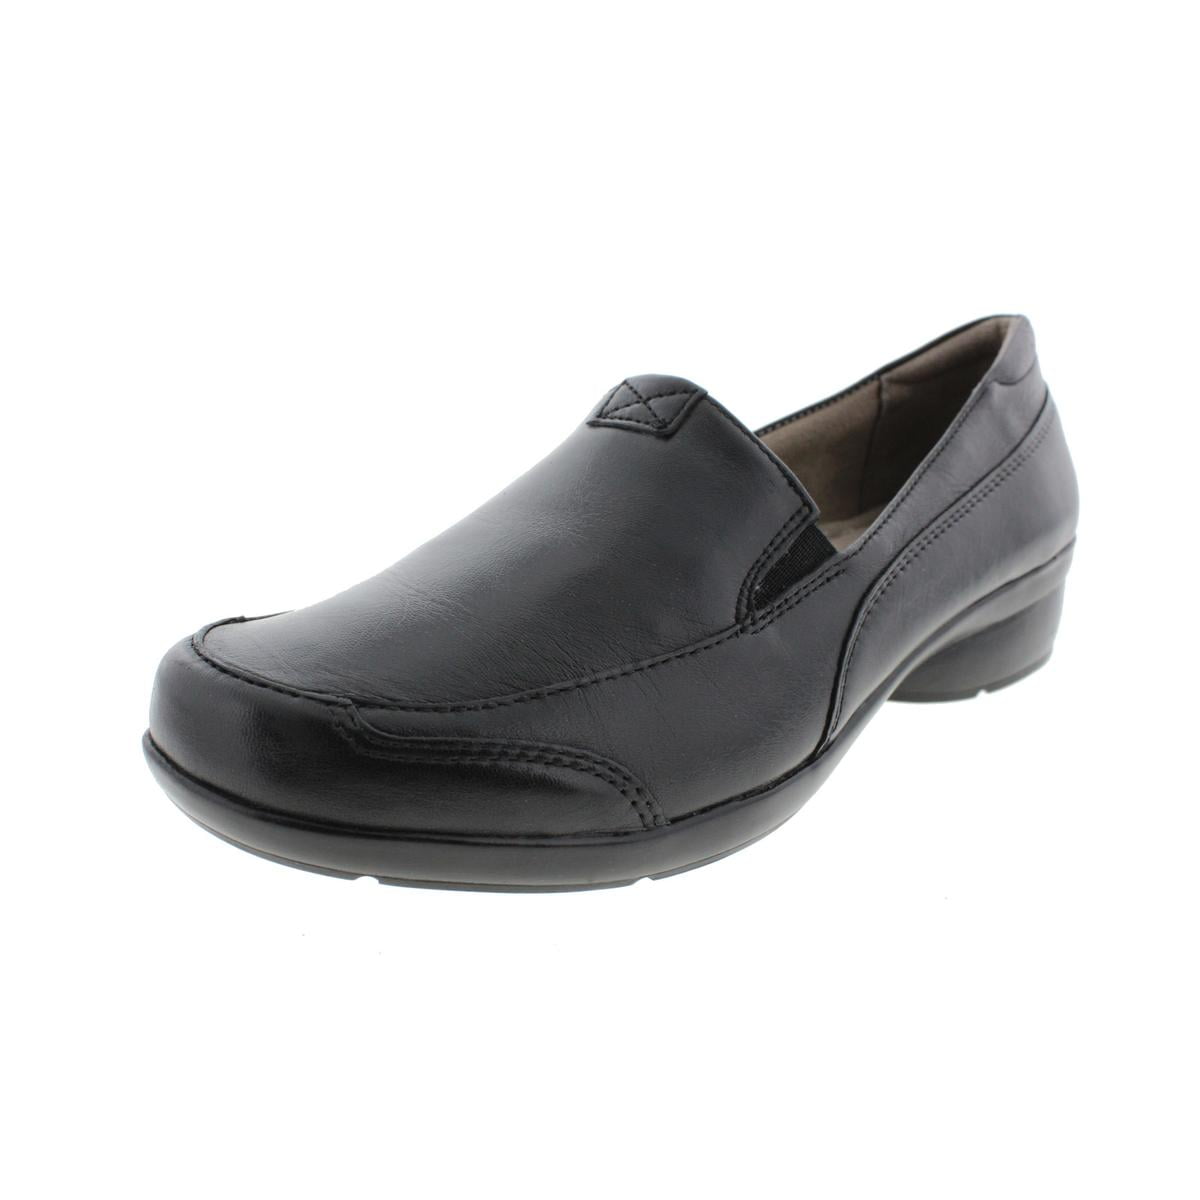 Womens Channing Leather Wedges Loafers - Walmart.com